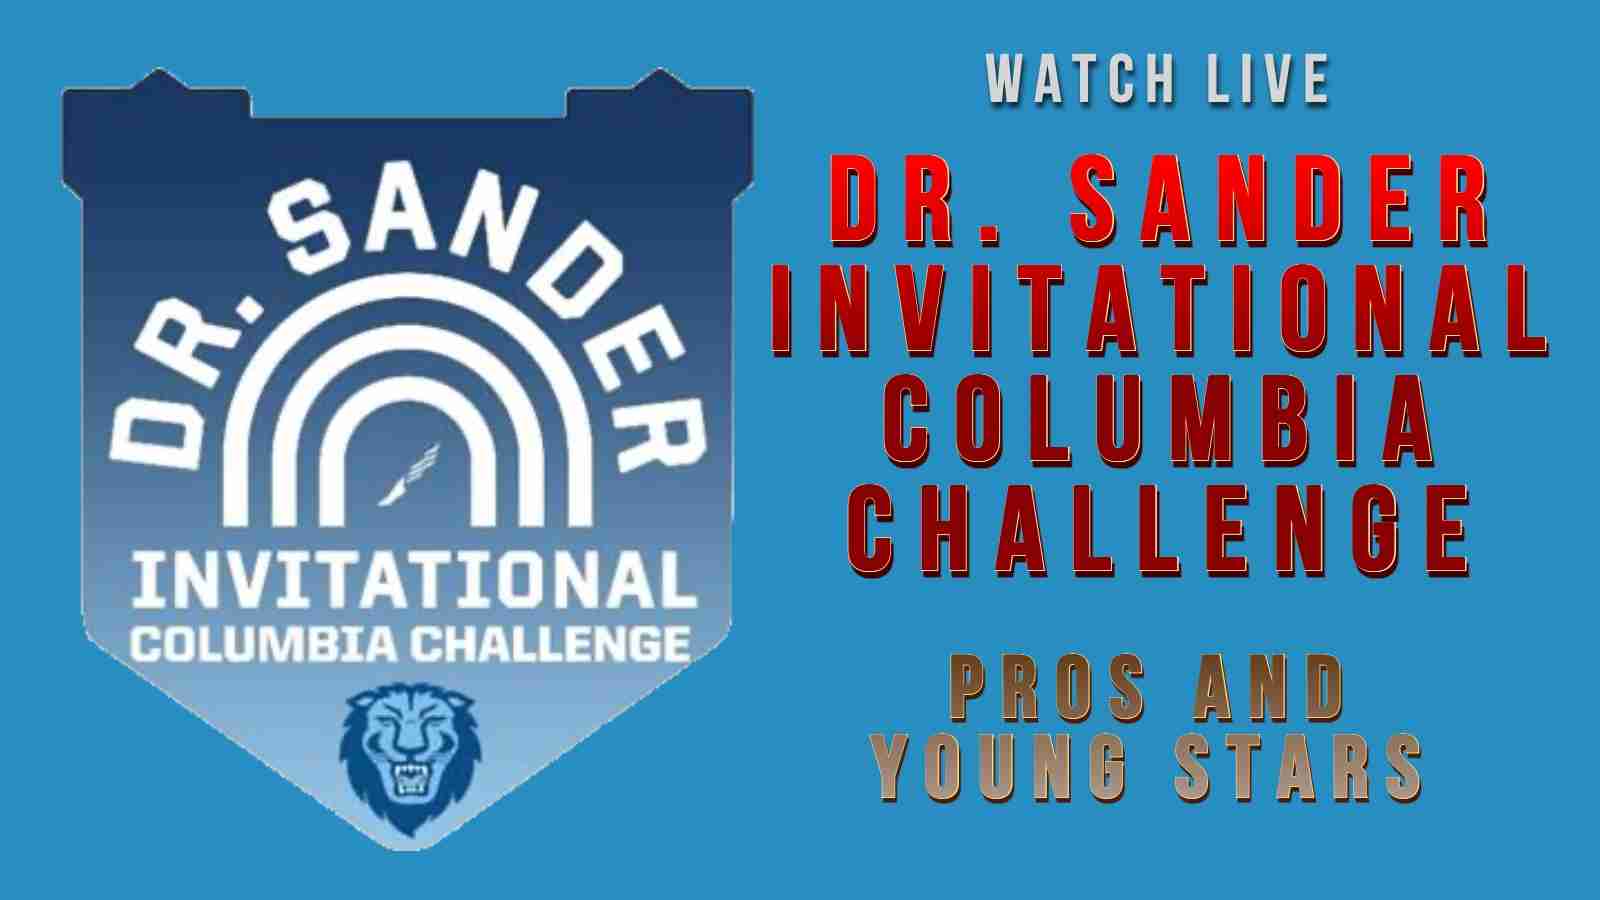 How to watch the 2022 Dr. Sander Invitational Columbia Challenge?